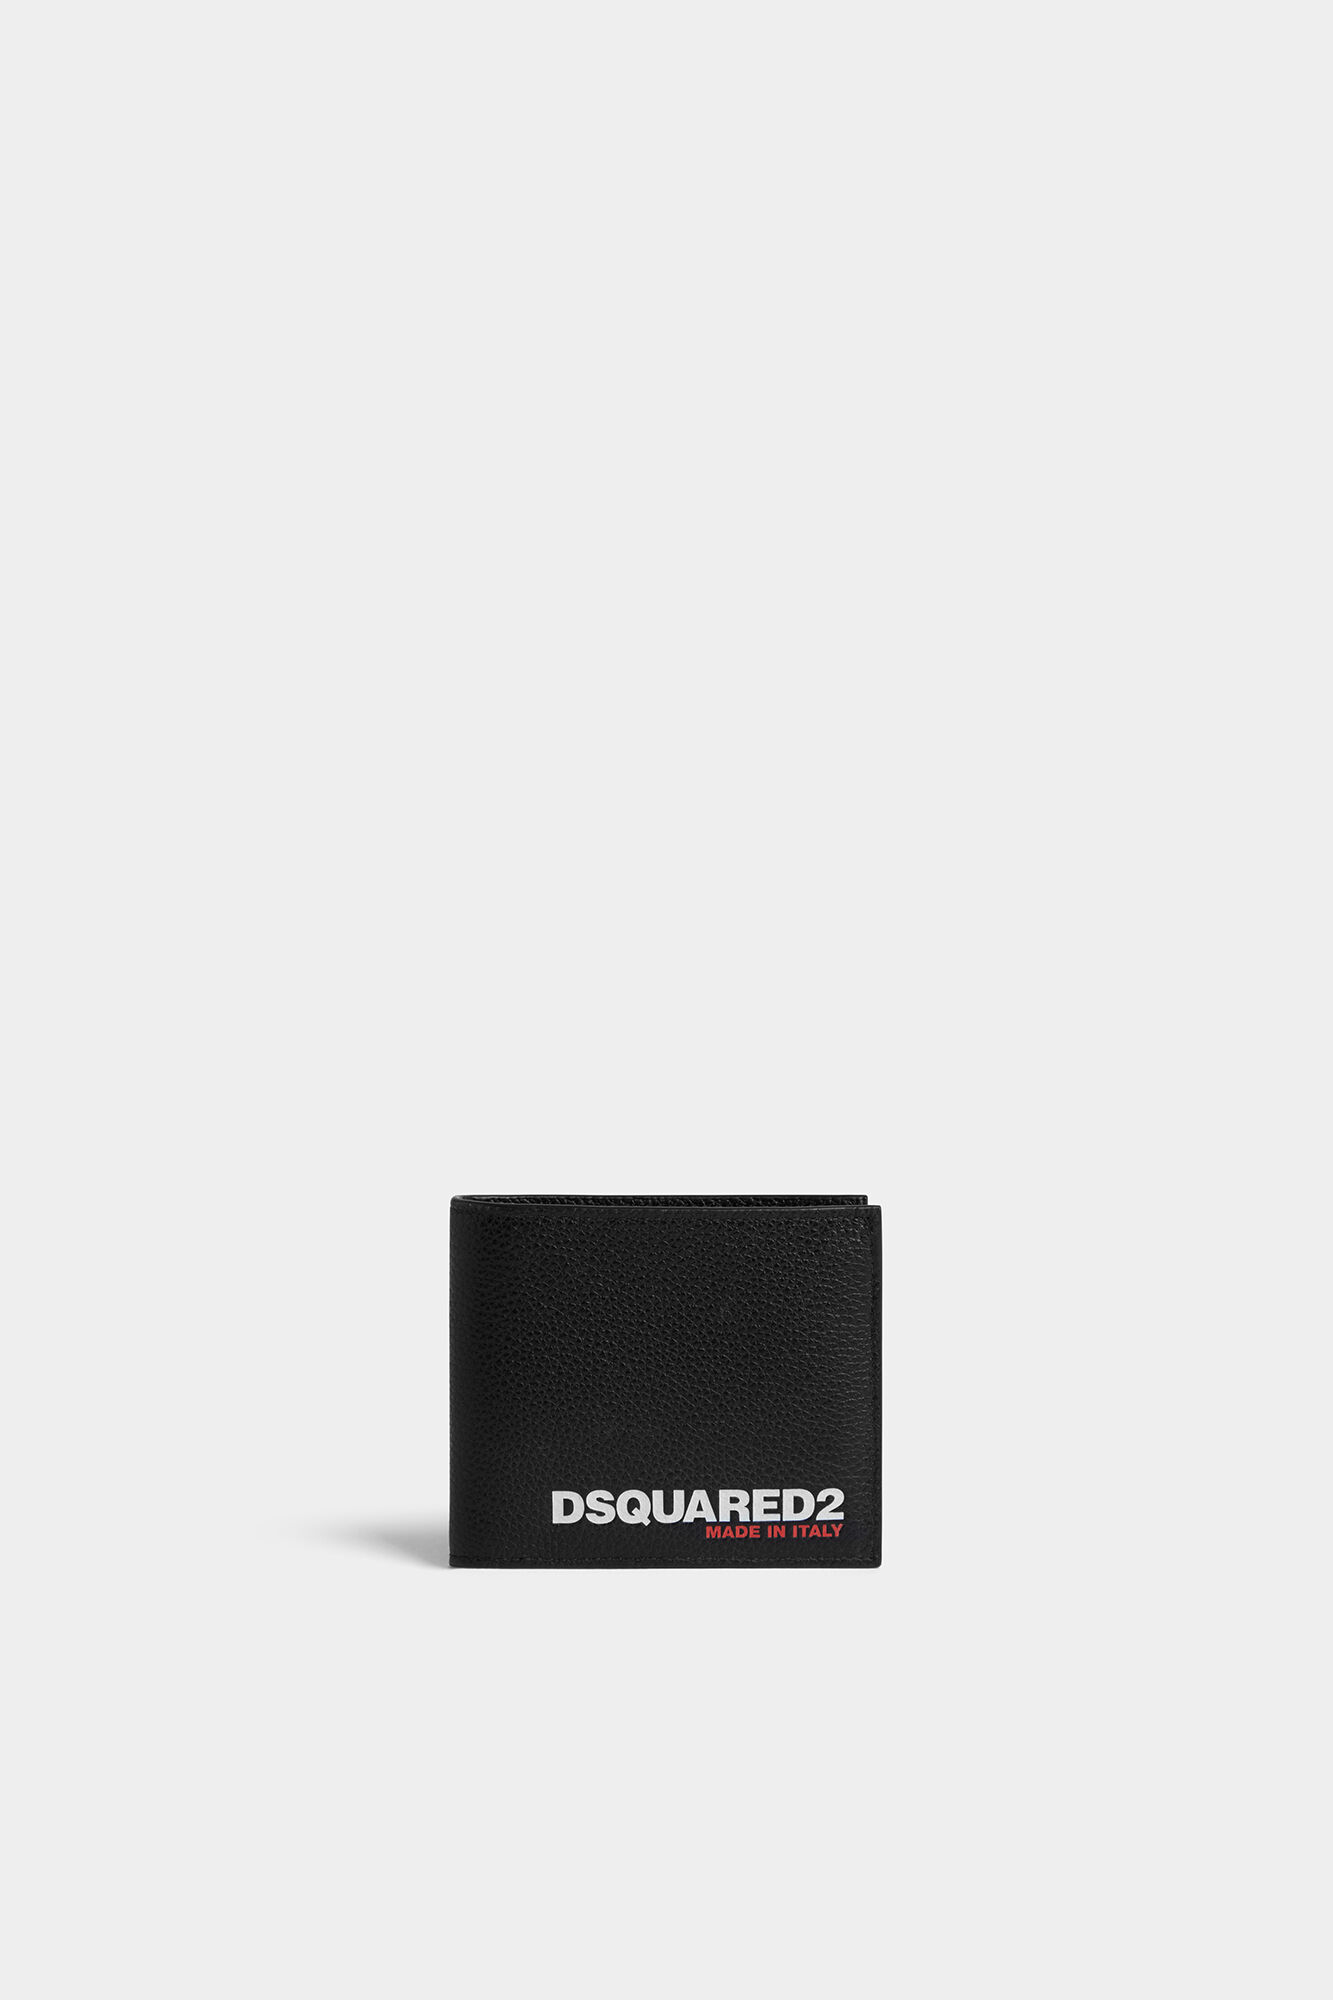 Men's Small Leather Goods | DSQUARED2